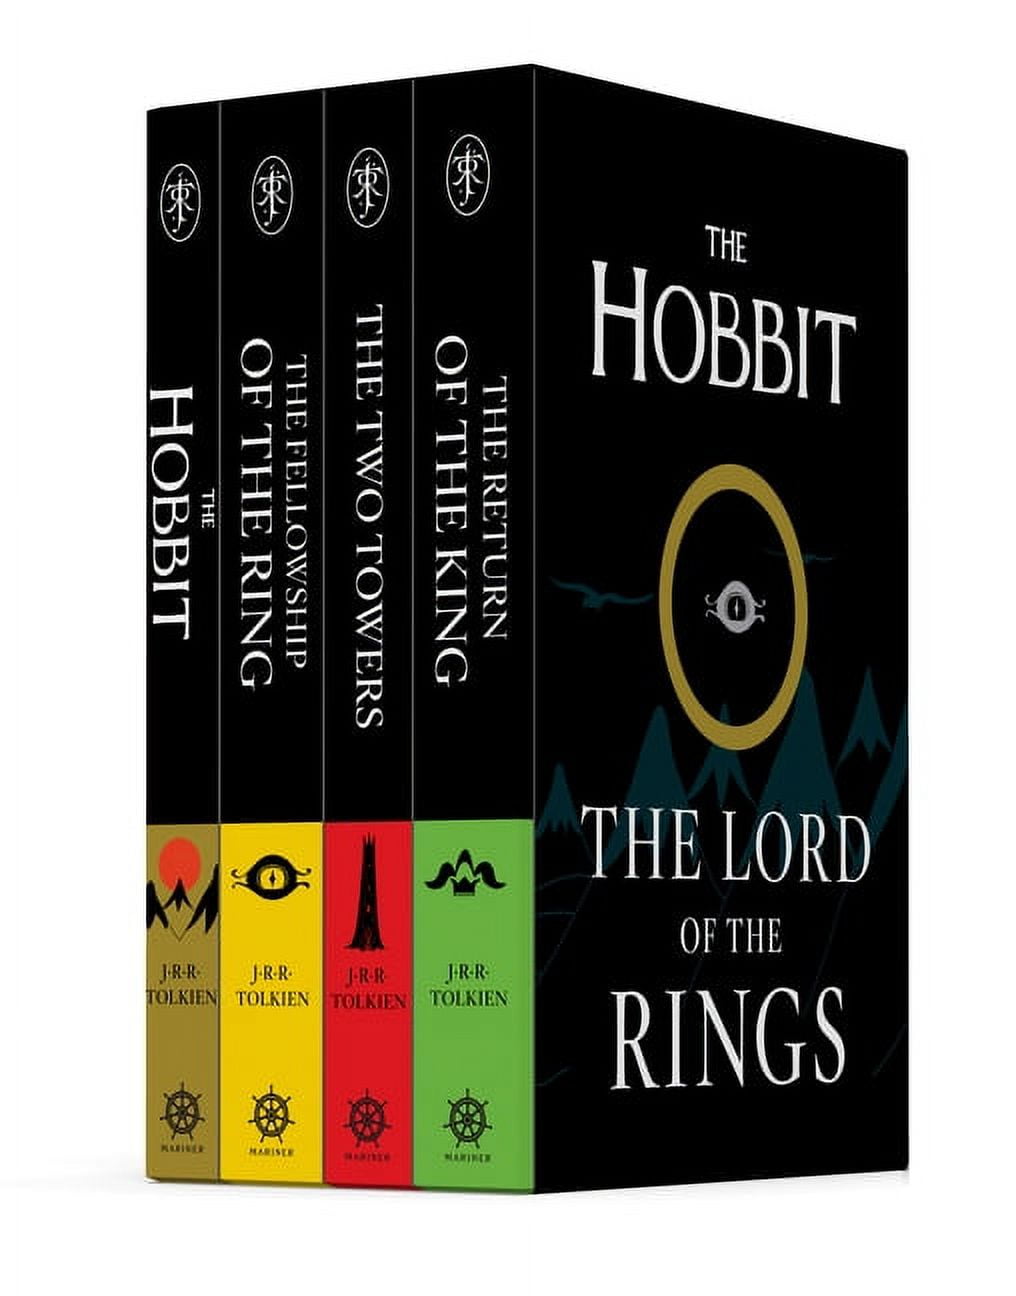 The Lord Of The Rings by J.R.R. Tolkien | A Novel Place Bookshop | UK